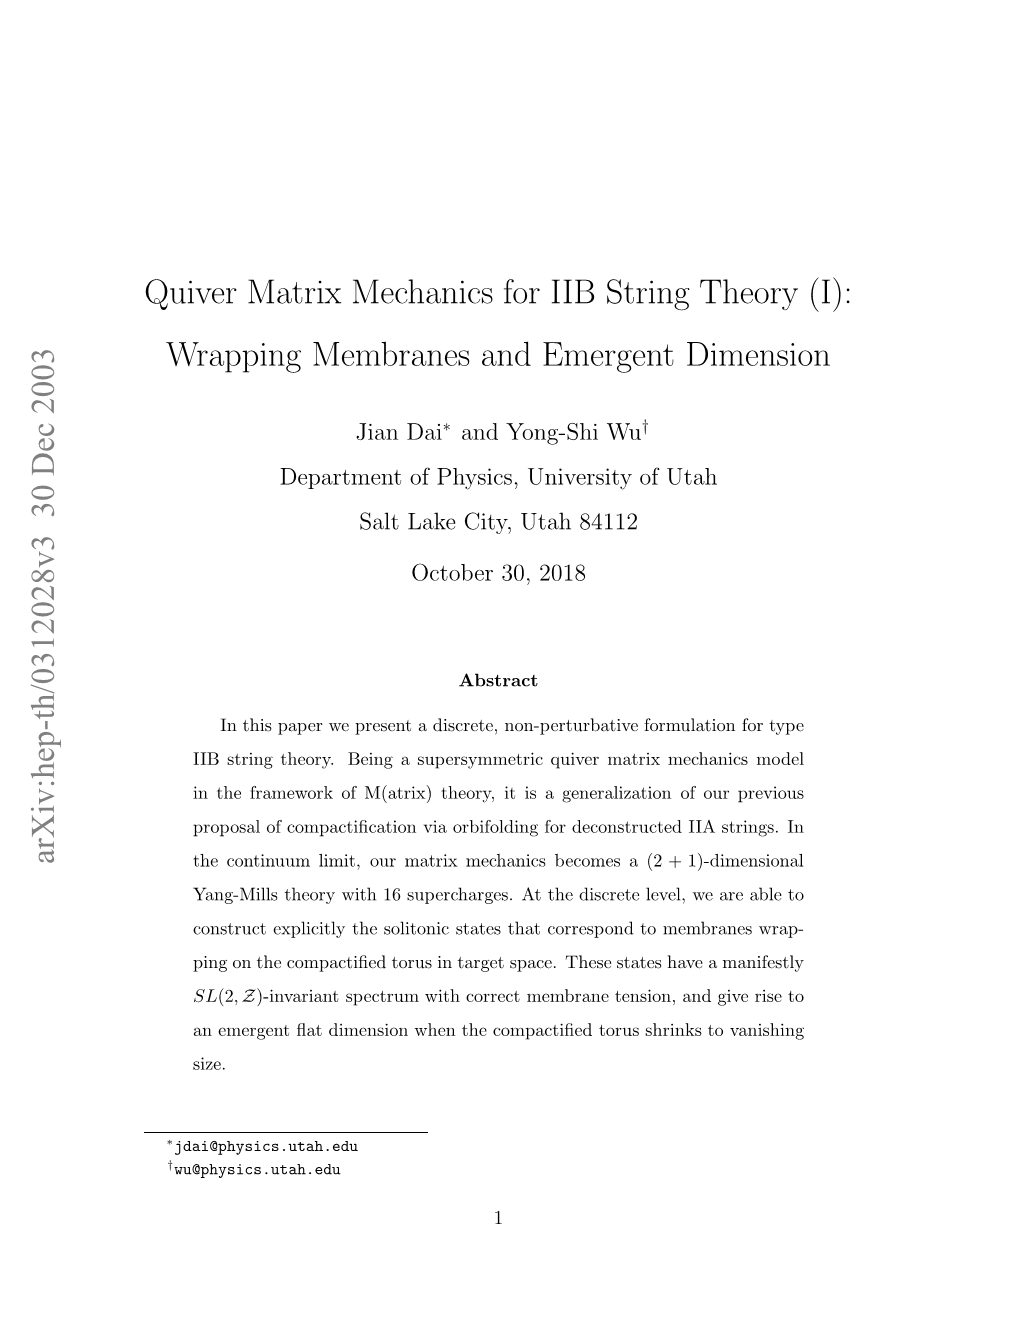 Quiver Matrix Mechanics for IIB String Theory (I): Wrapping Membranes